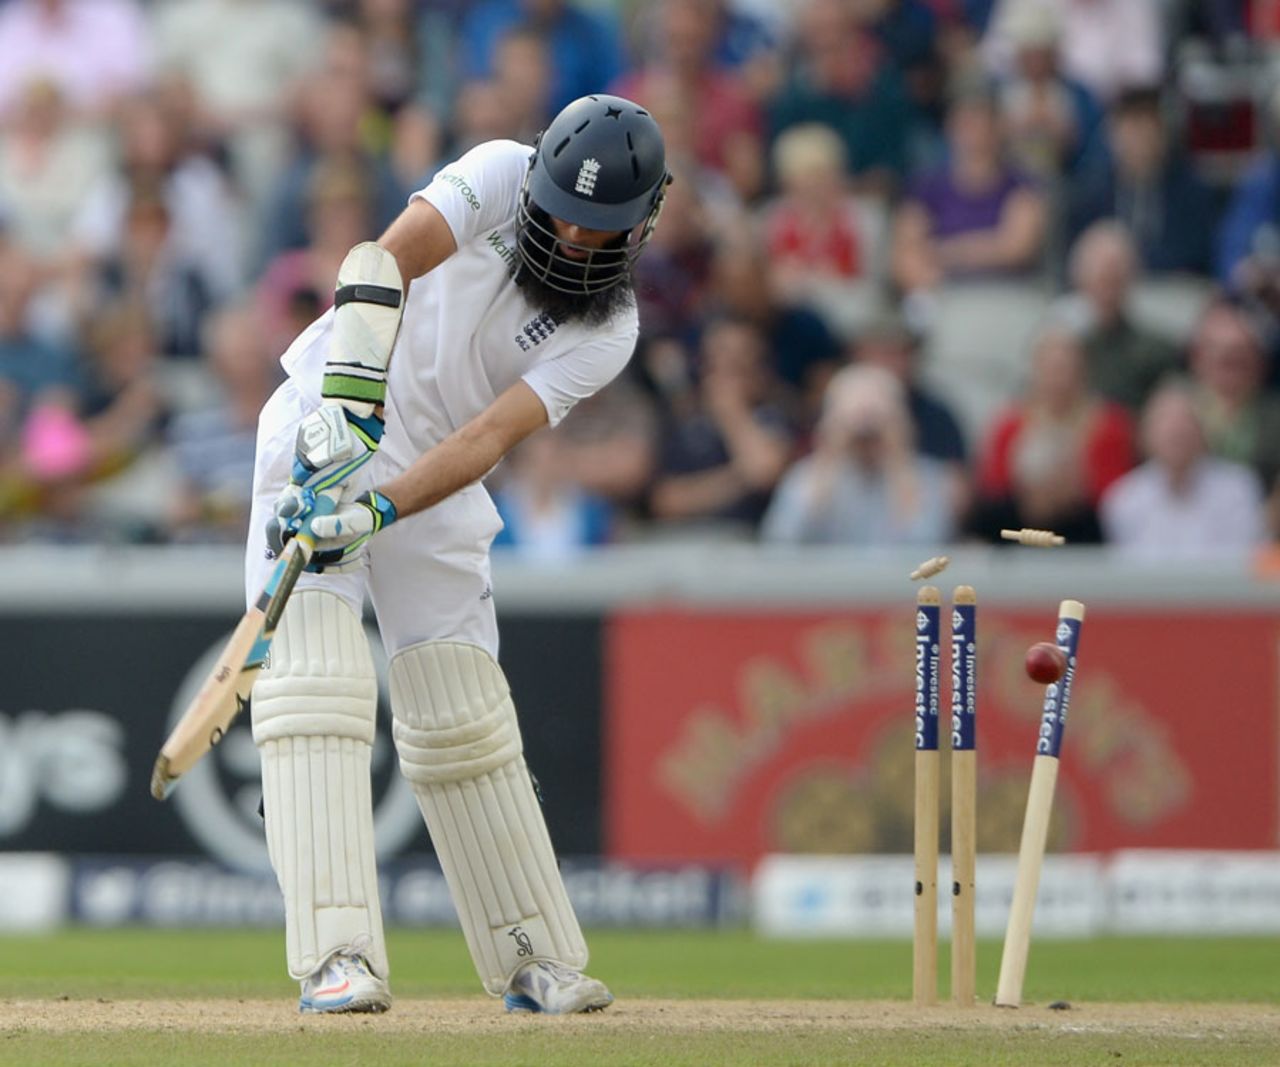 Moeen Ali lost his stumps to Varun Aaron, England v India, 4th Test, Old Trafford, 2nd day, August 8, 2014